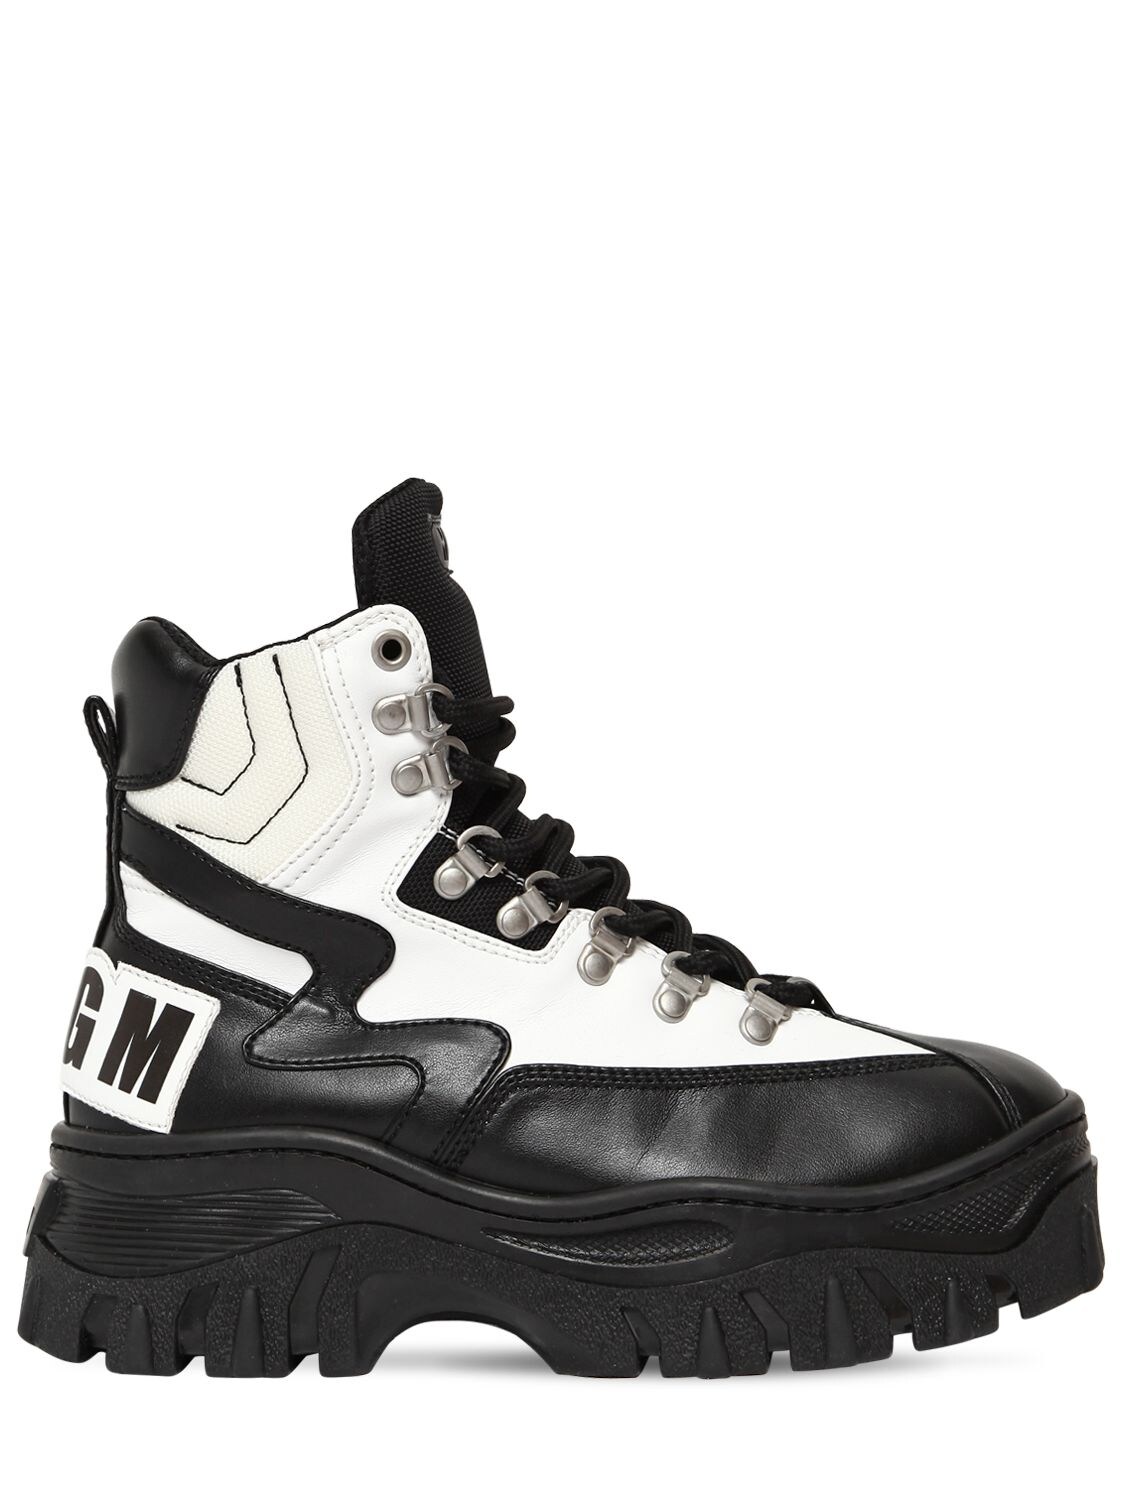 Msgm 40mm Faux Leather High Top Sneakers In White/black